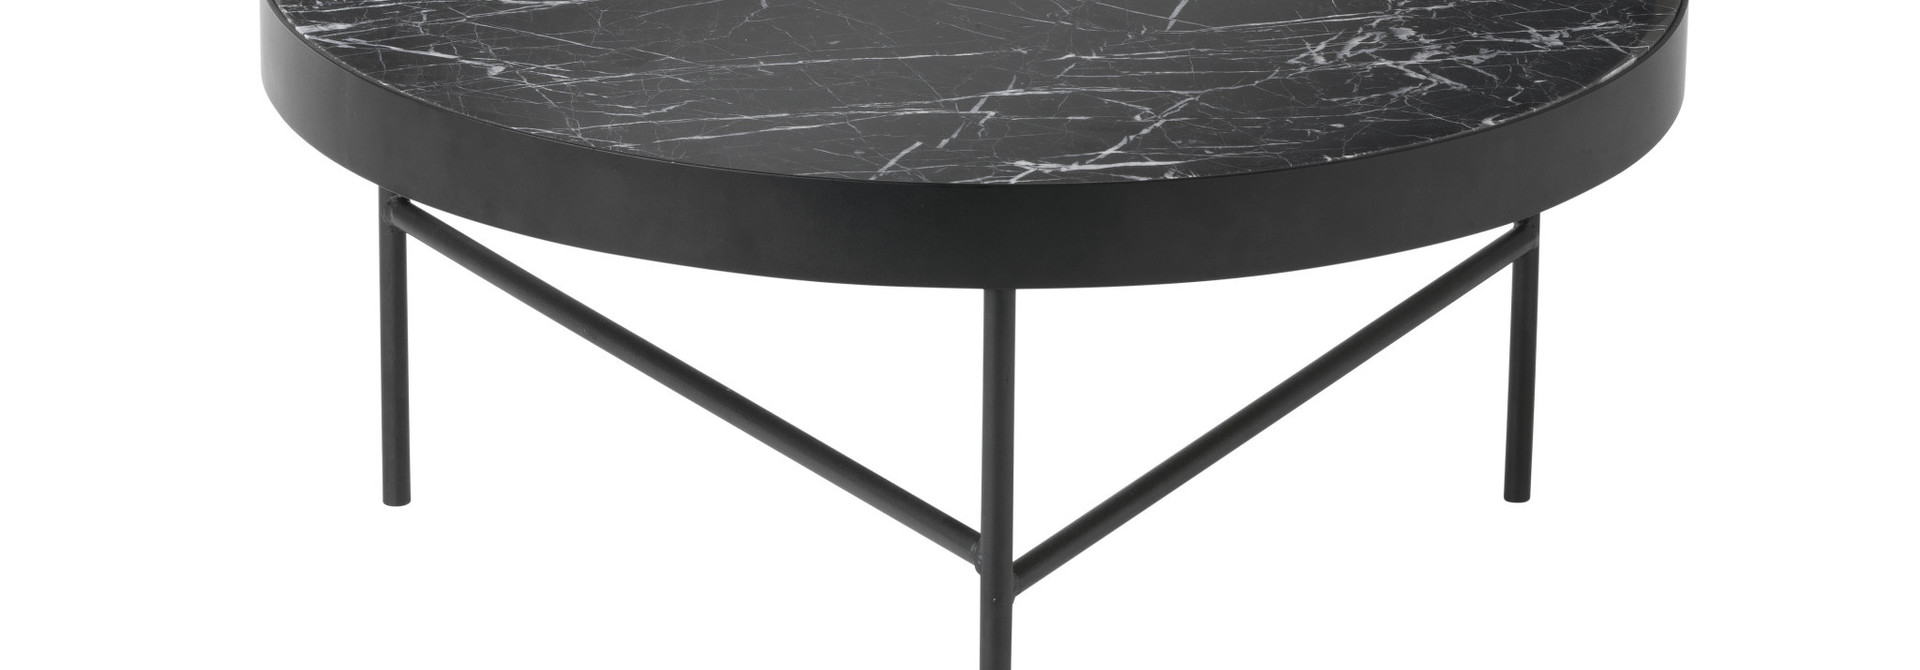 Marble table - Large